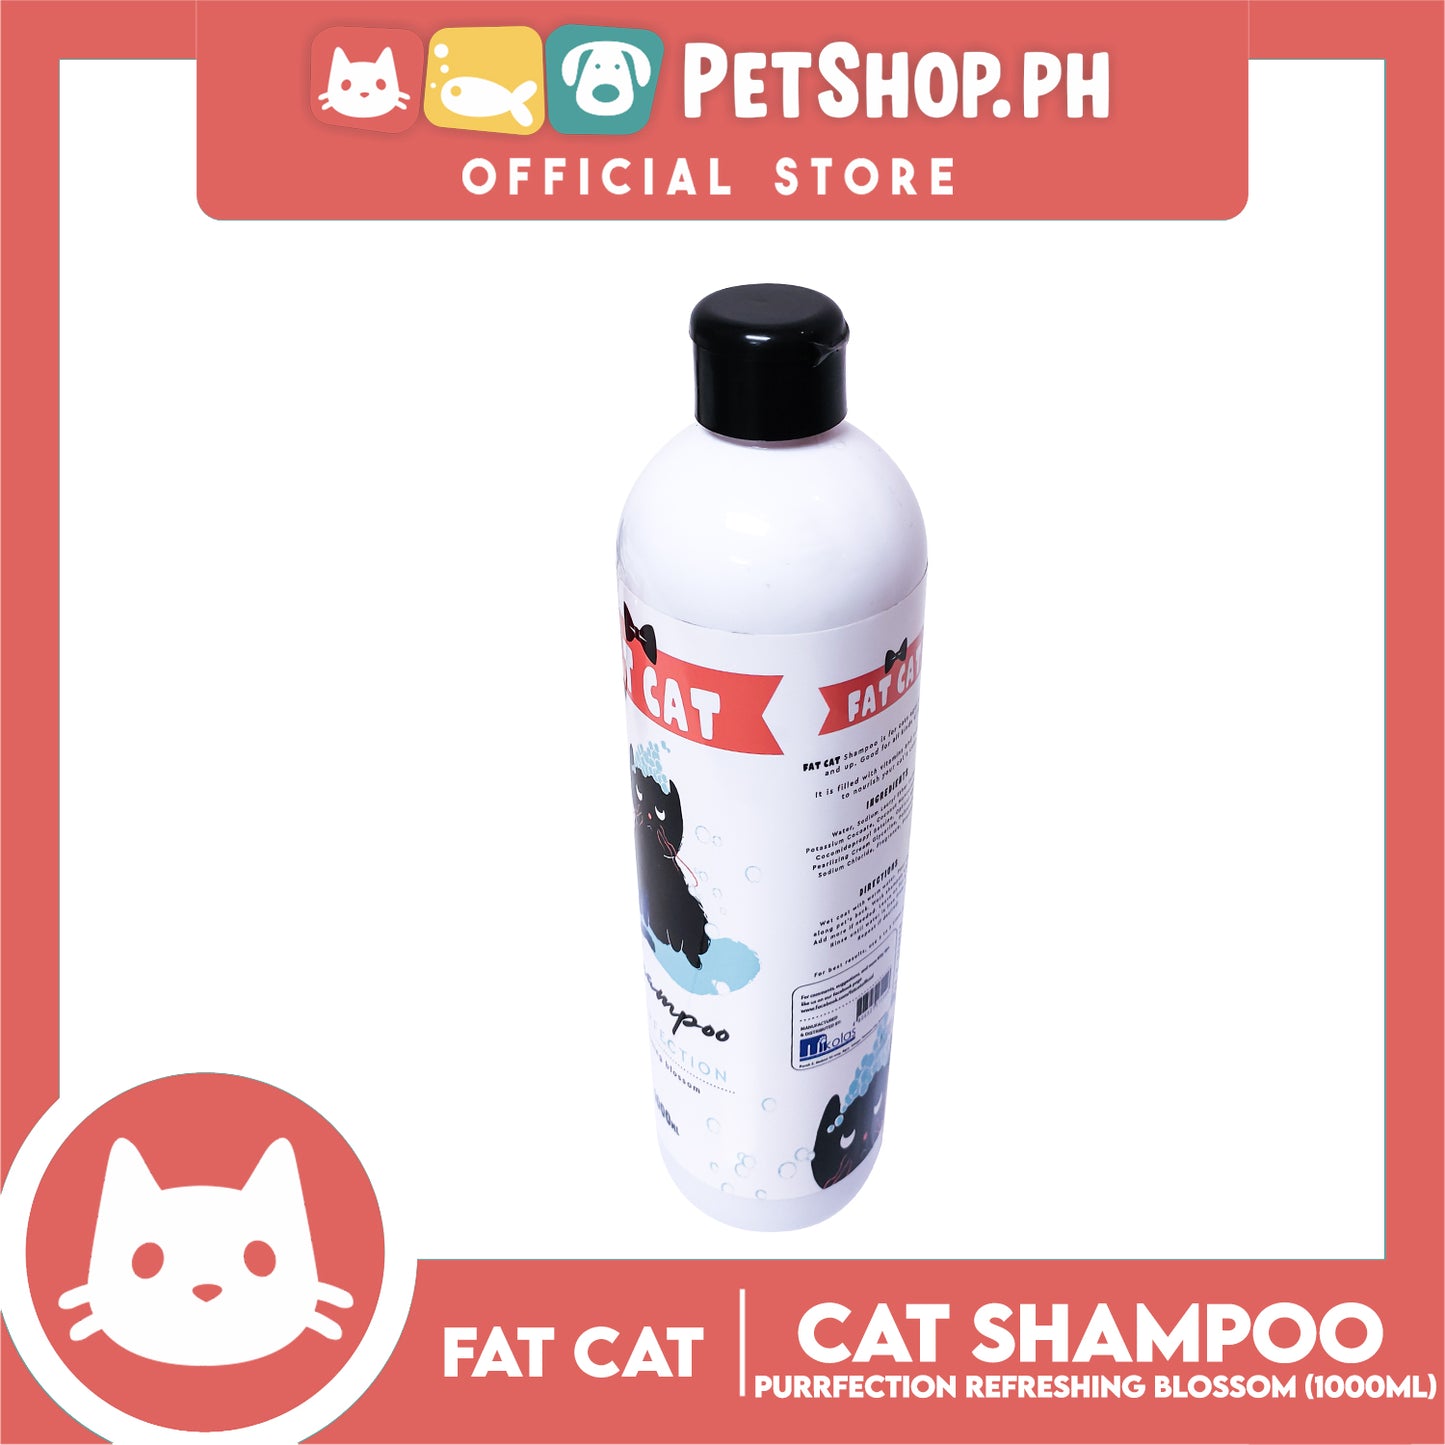 Fat Cat Shampoo Purfection Refreshing Blossom 1000ml Cat Grooming